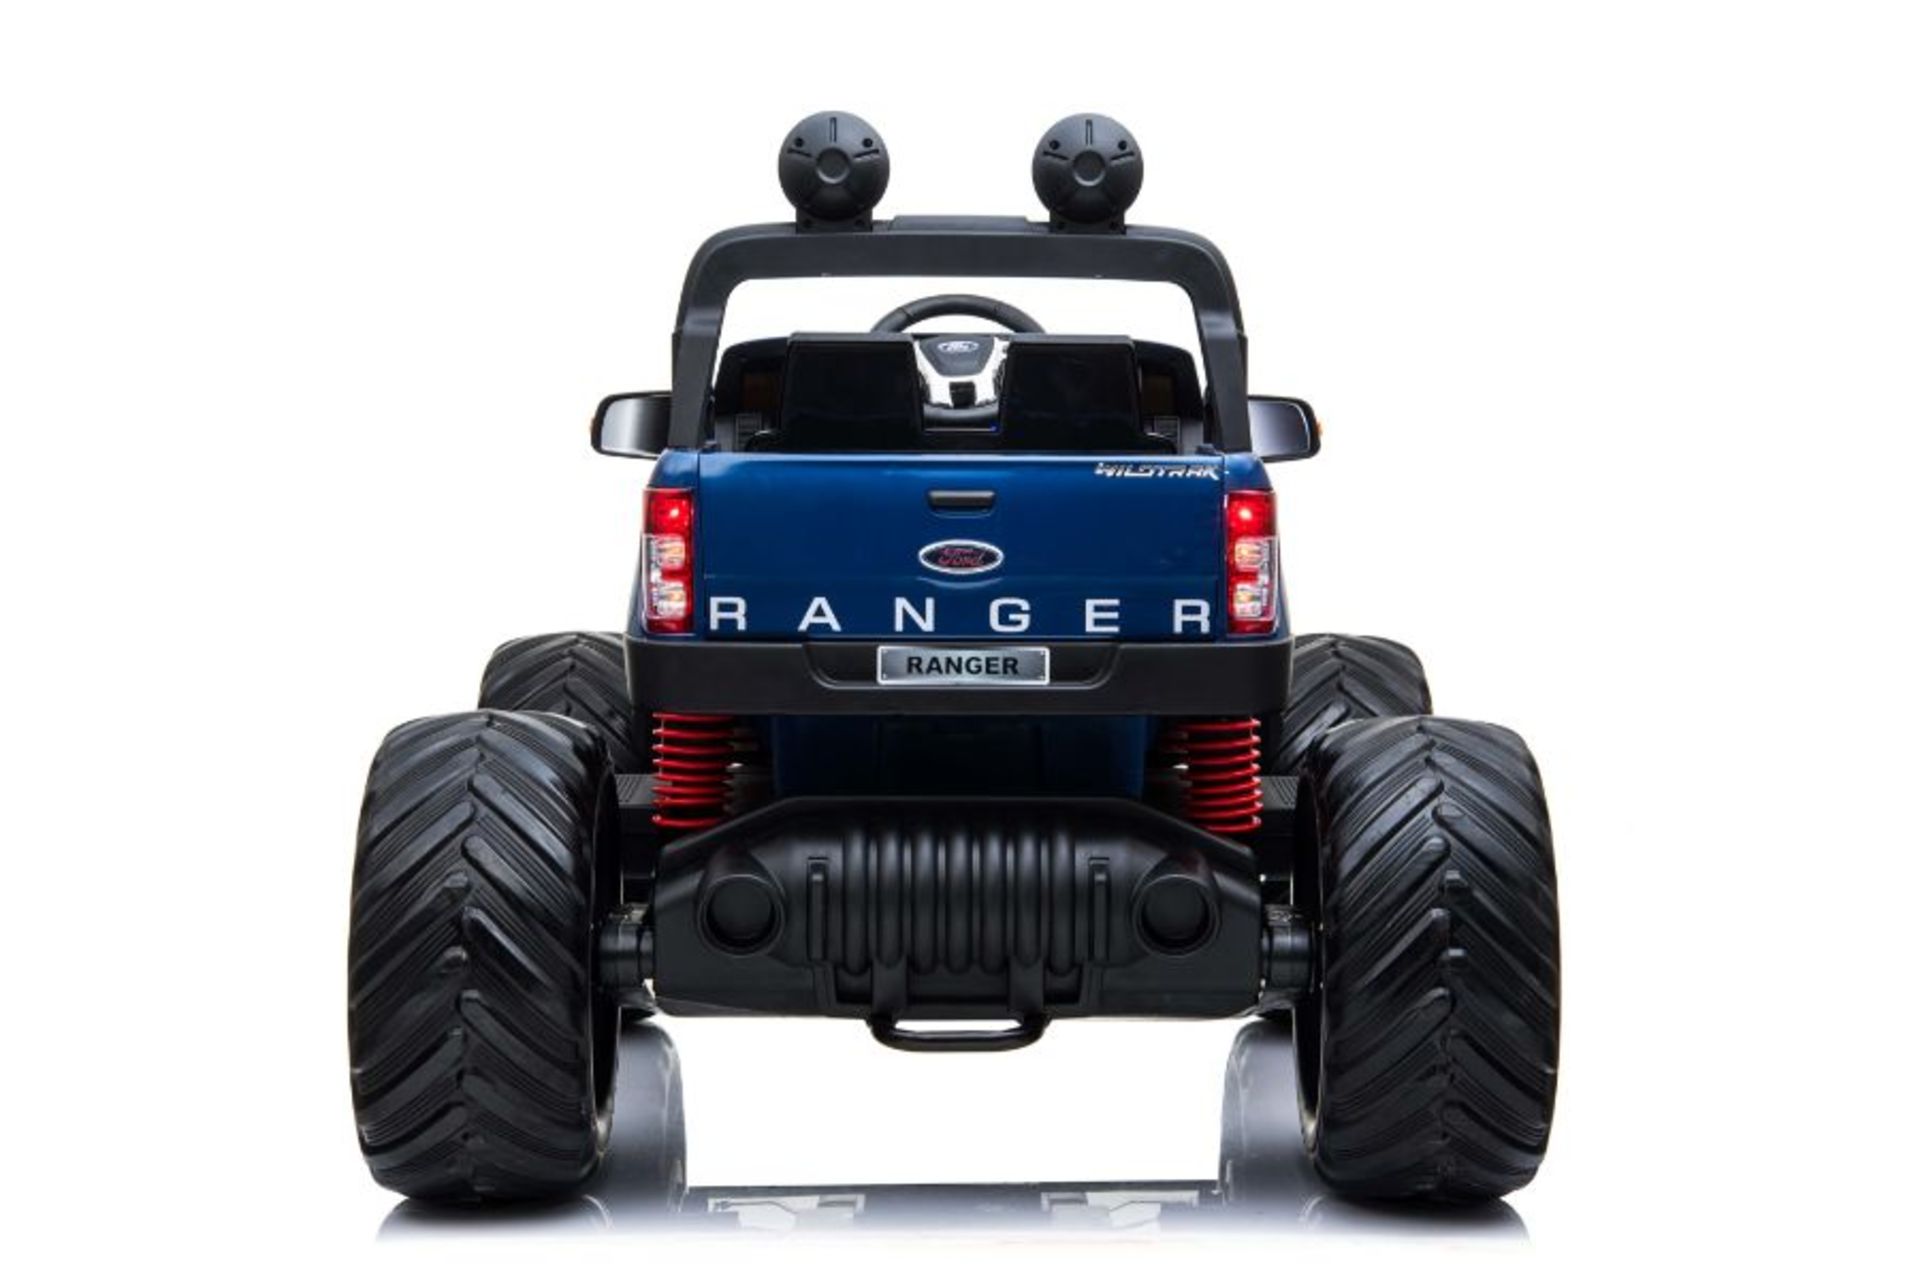 Ride On Fully Licenced Ford Ranger Monster Truck 12v with Parental Remote Control - Blue - Image 7 of 8